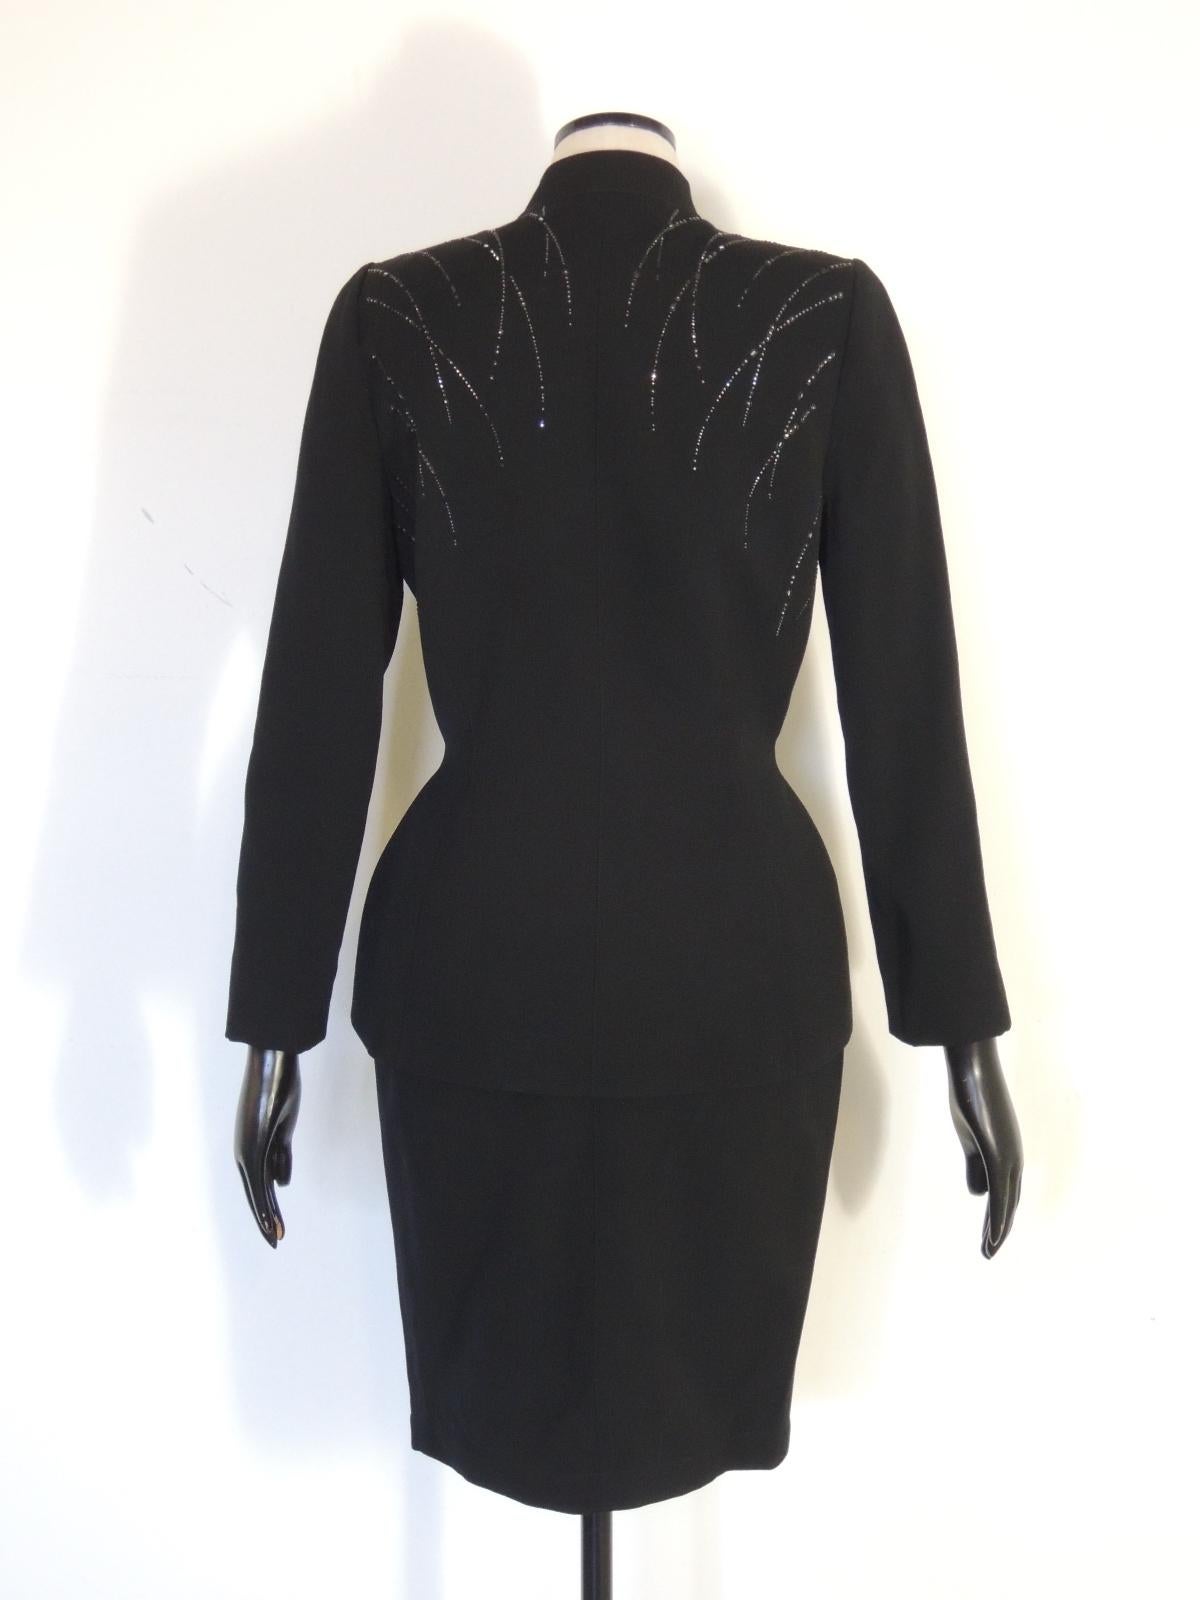 Thierry Mugler Vintage Black Embellished Skirt Suit In Excellent Condition For Sale In Oakland, CA